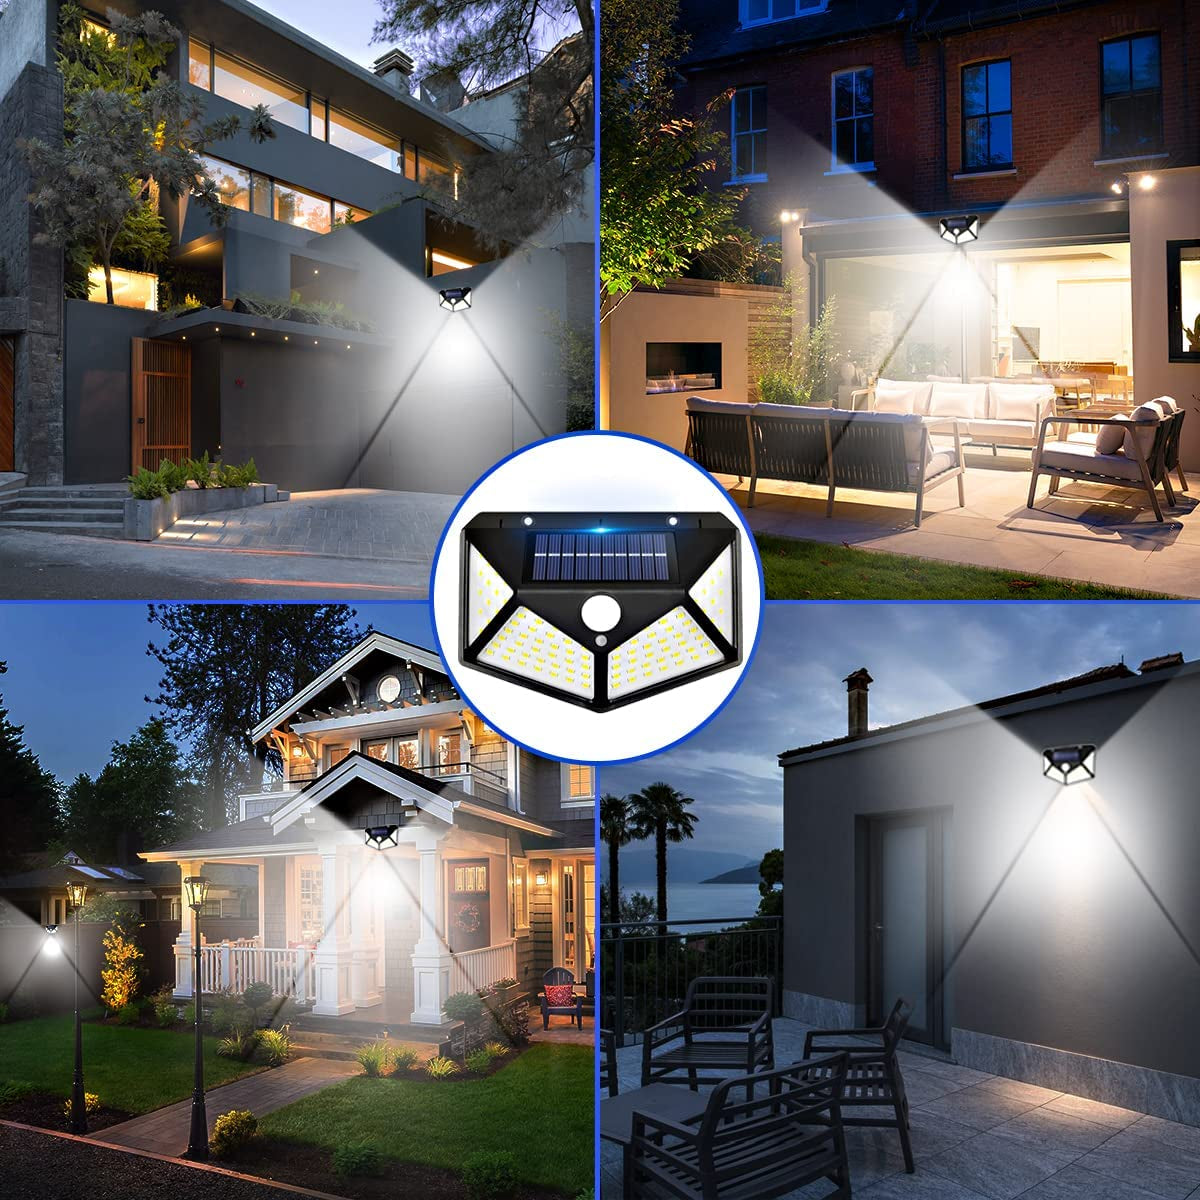  2 Pack Exterior  Outdoor Solar Wall Light, 100 LEDs with Lights Reflector, Waterproof, Motion Sensored